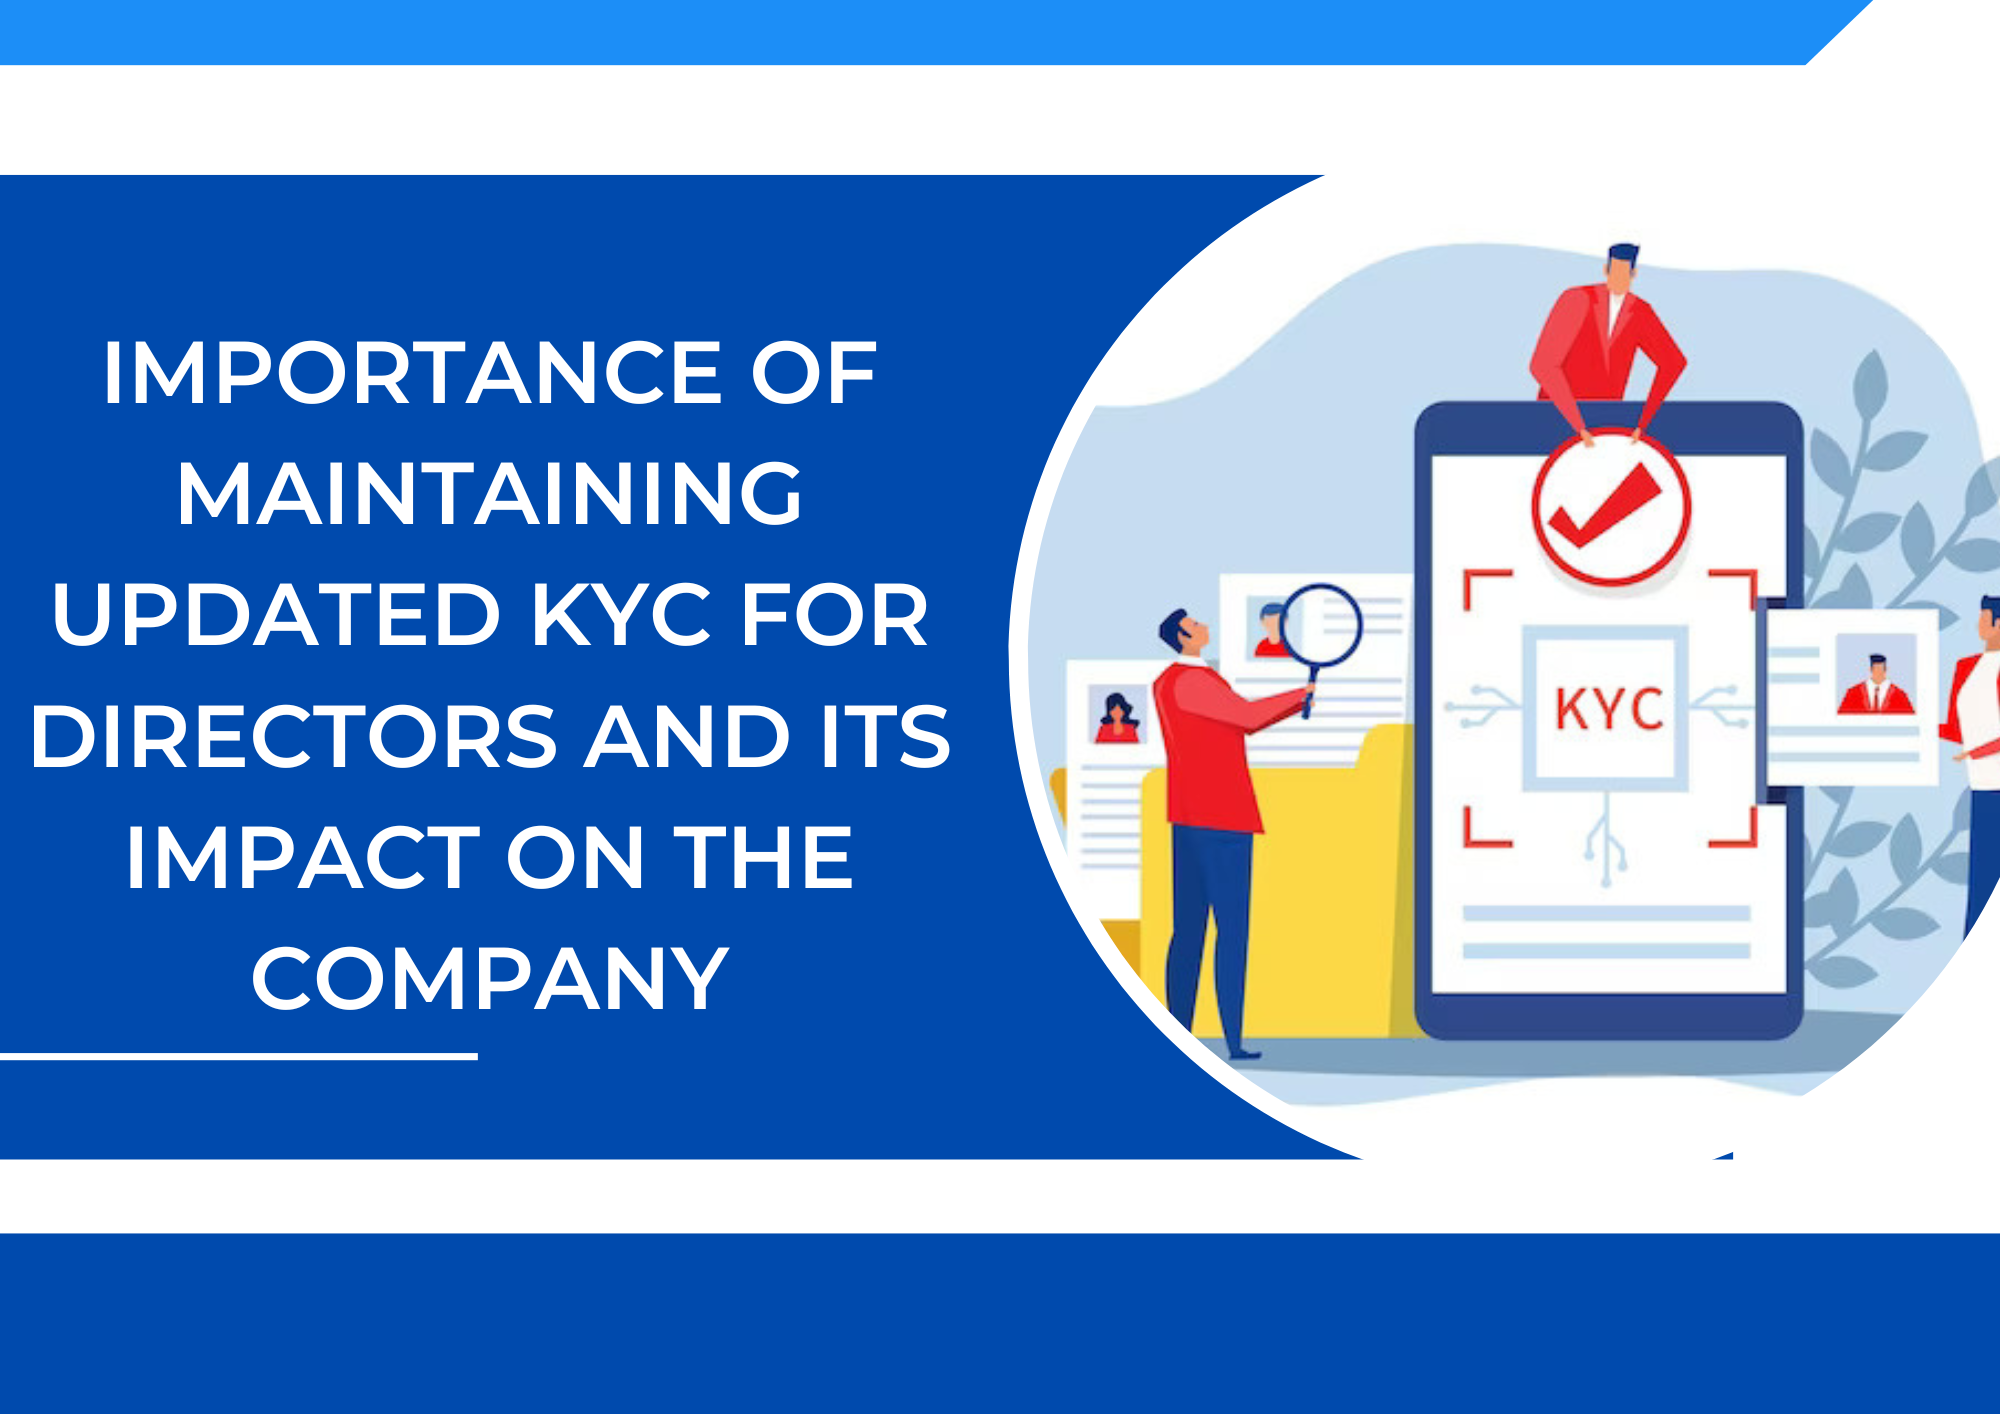 Importance of Maintaining Updated KYC for Directors and Its Impact on the Company